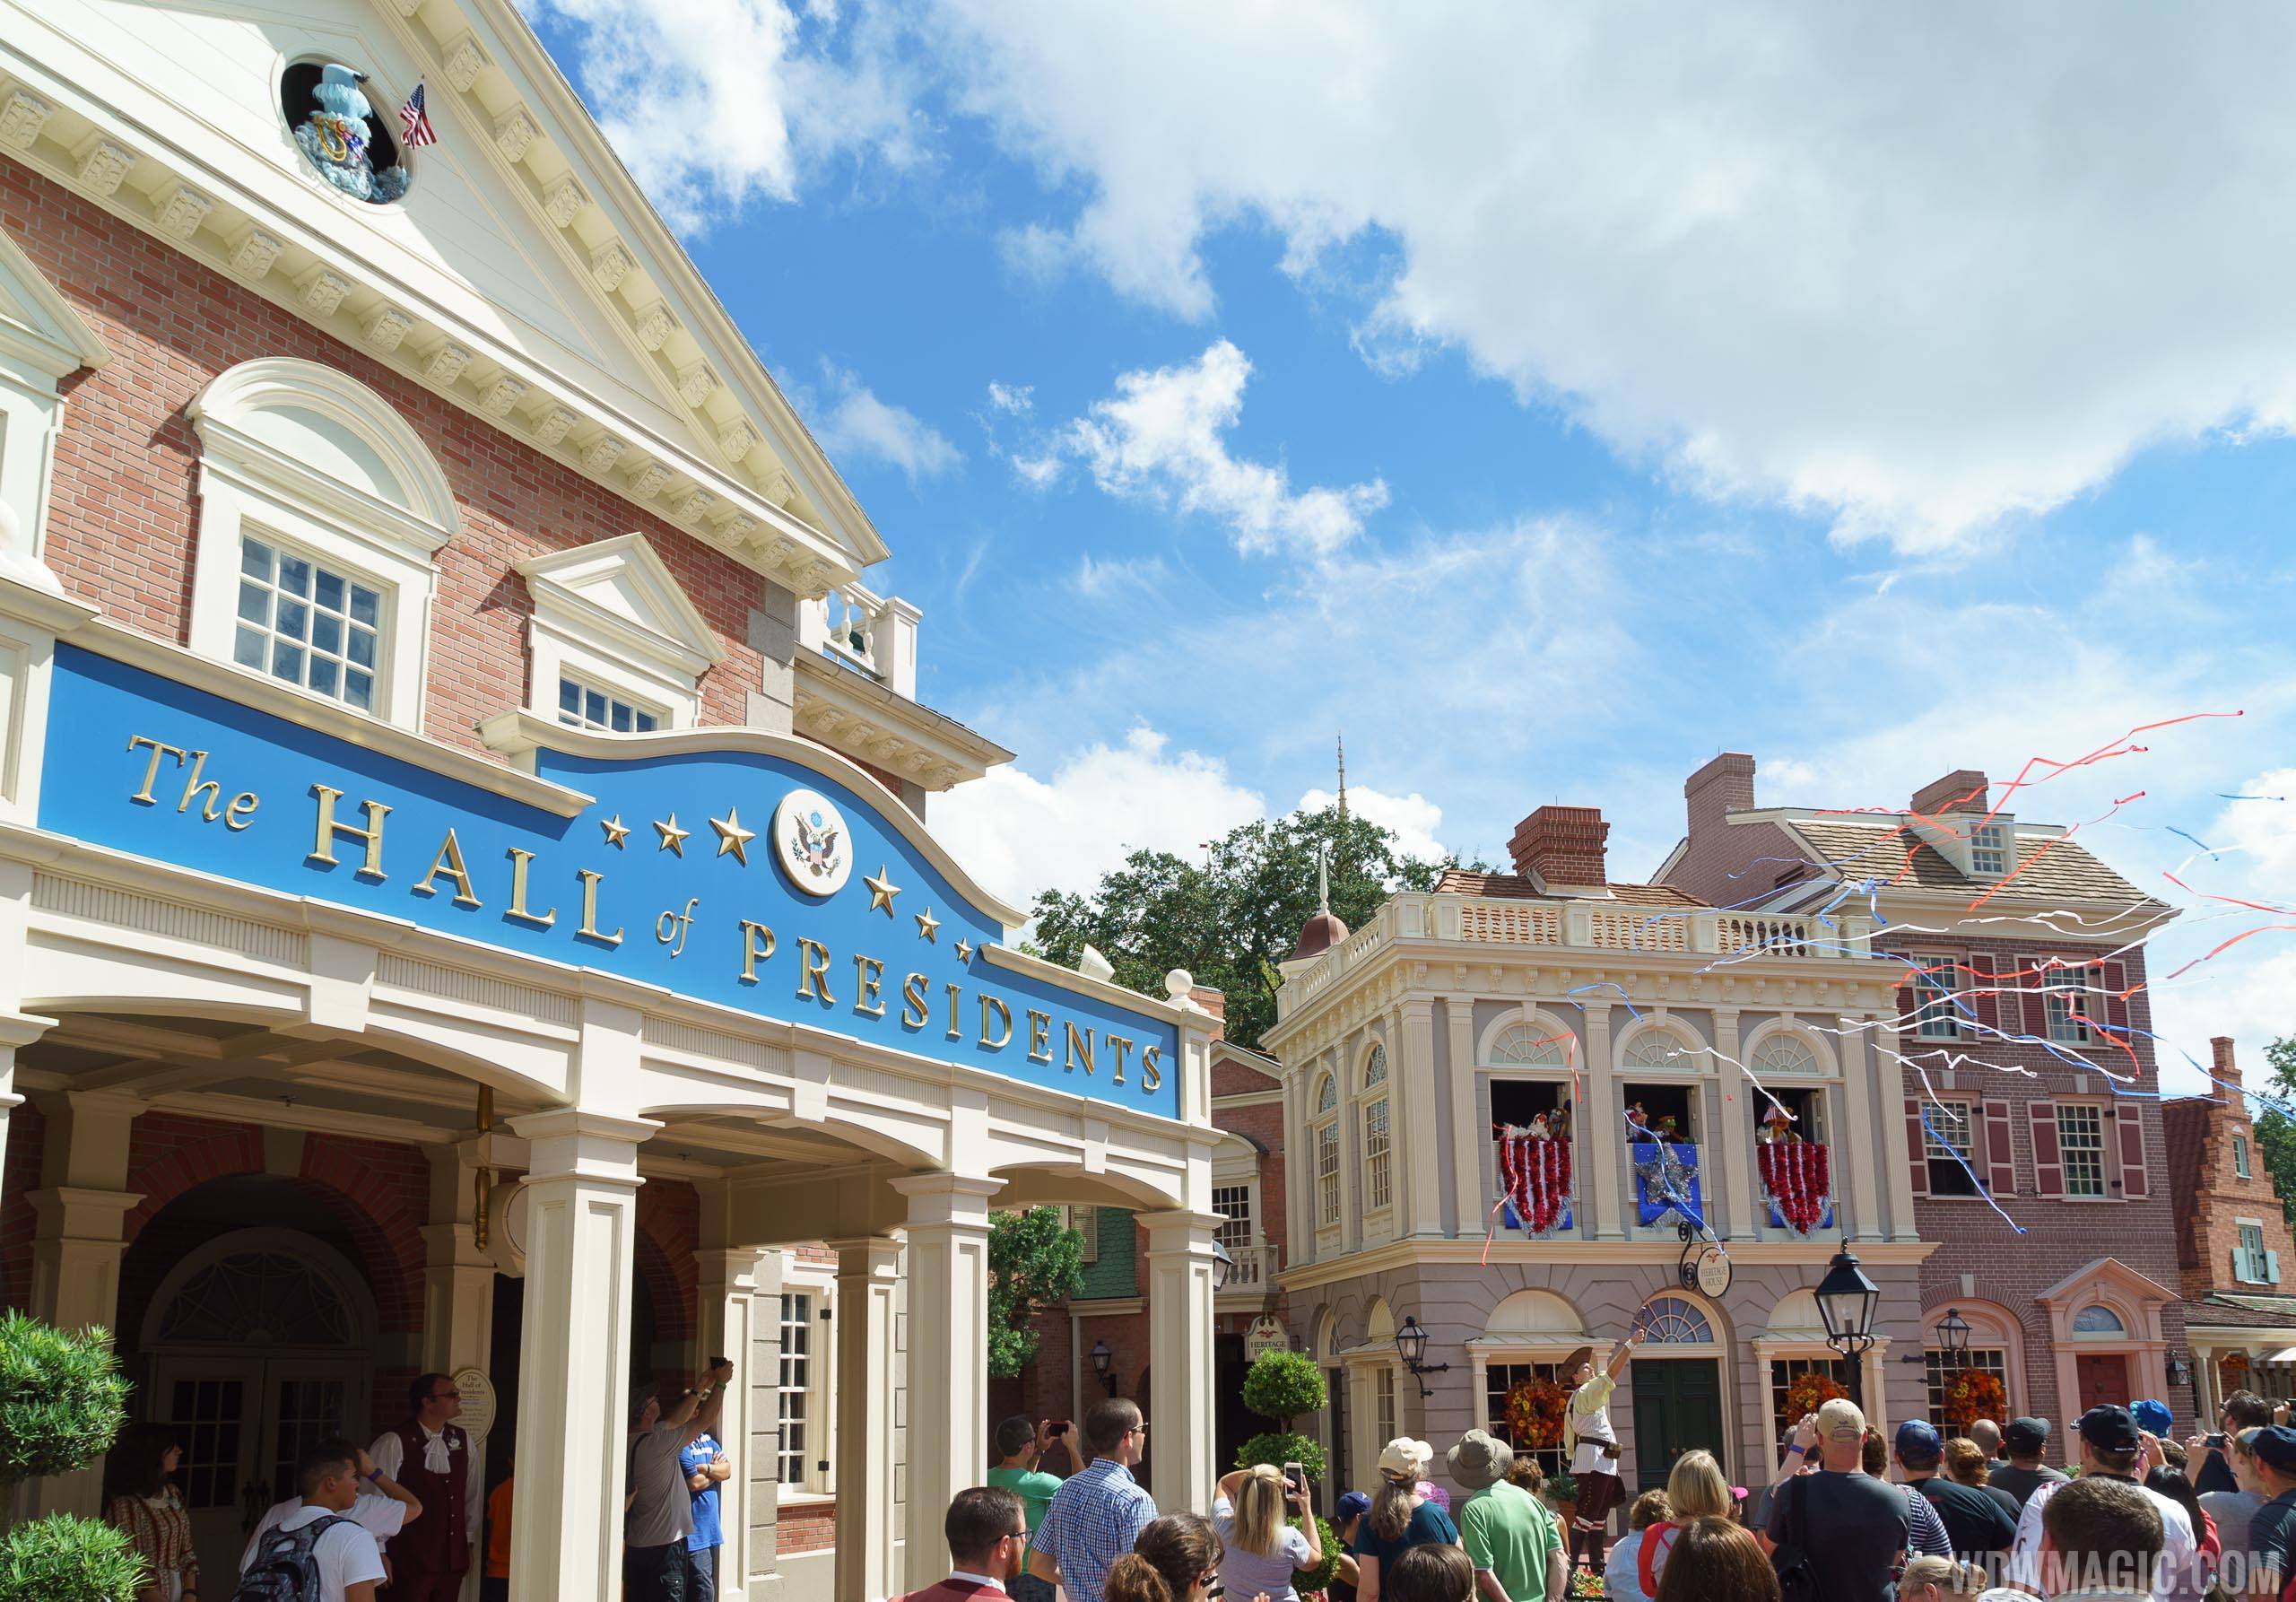 The Hall of Presidents now closed for refurbishment ahead of today's presidential inauguration